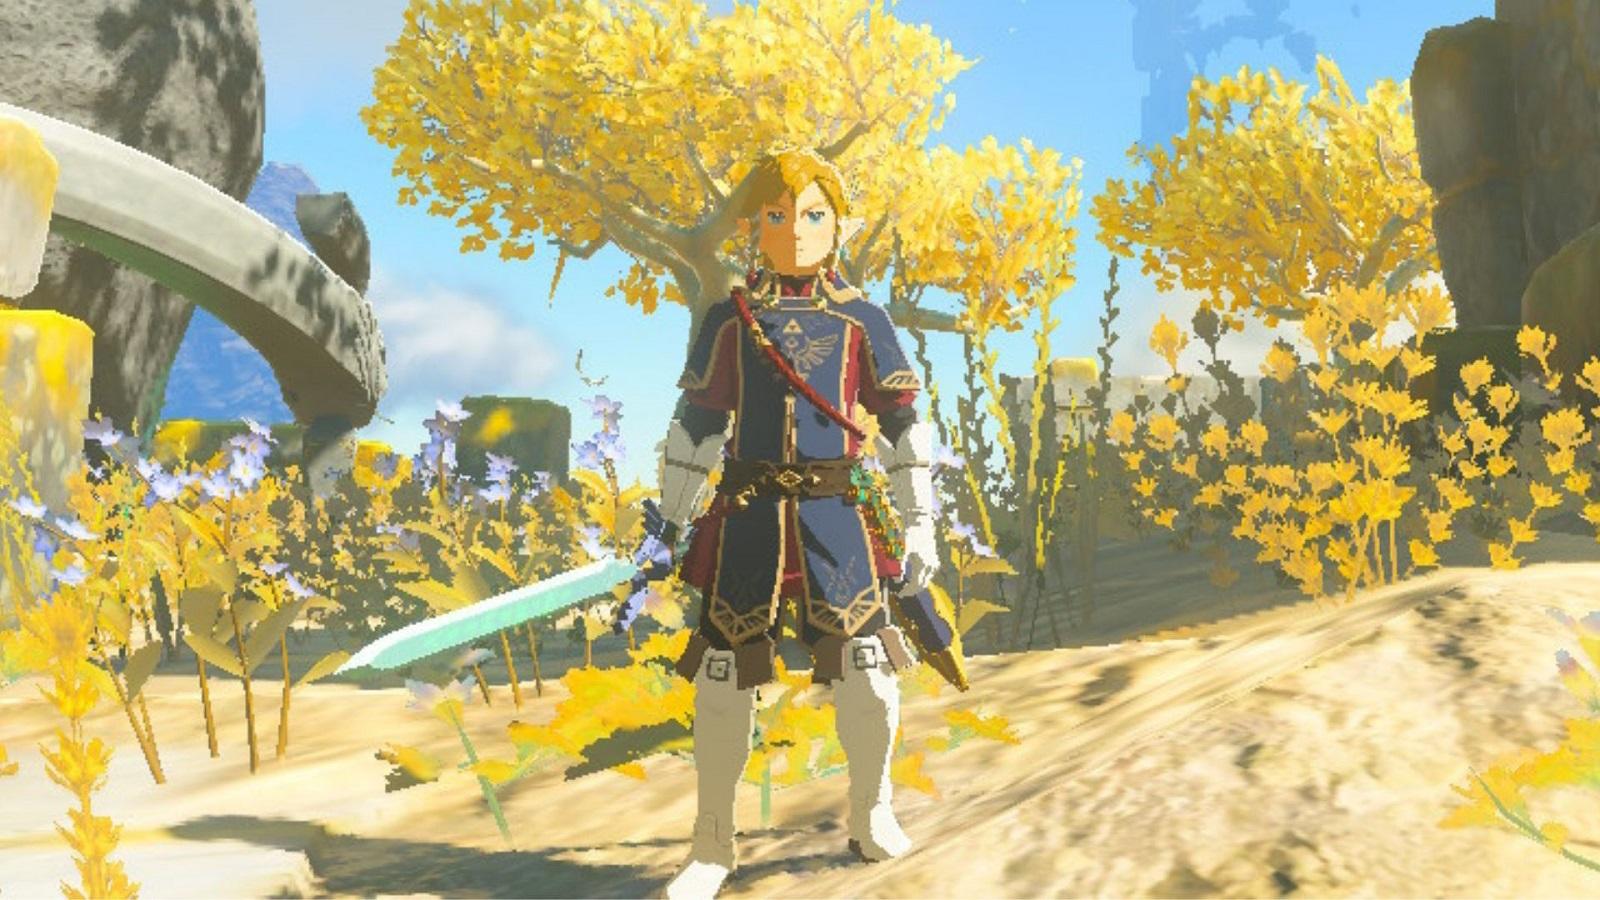 Link wielding the Master Sword in Tears of the Kingdom